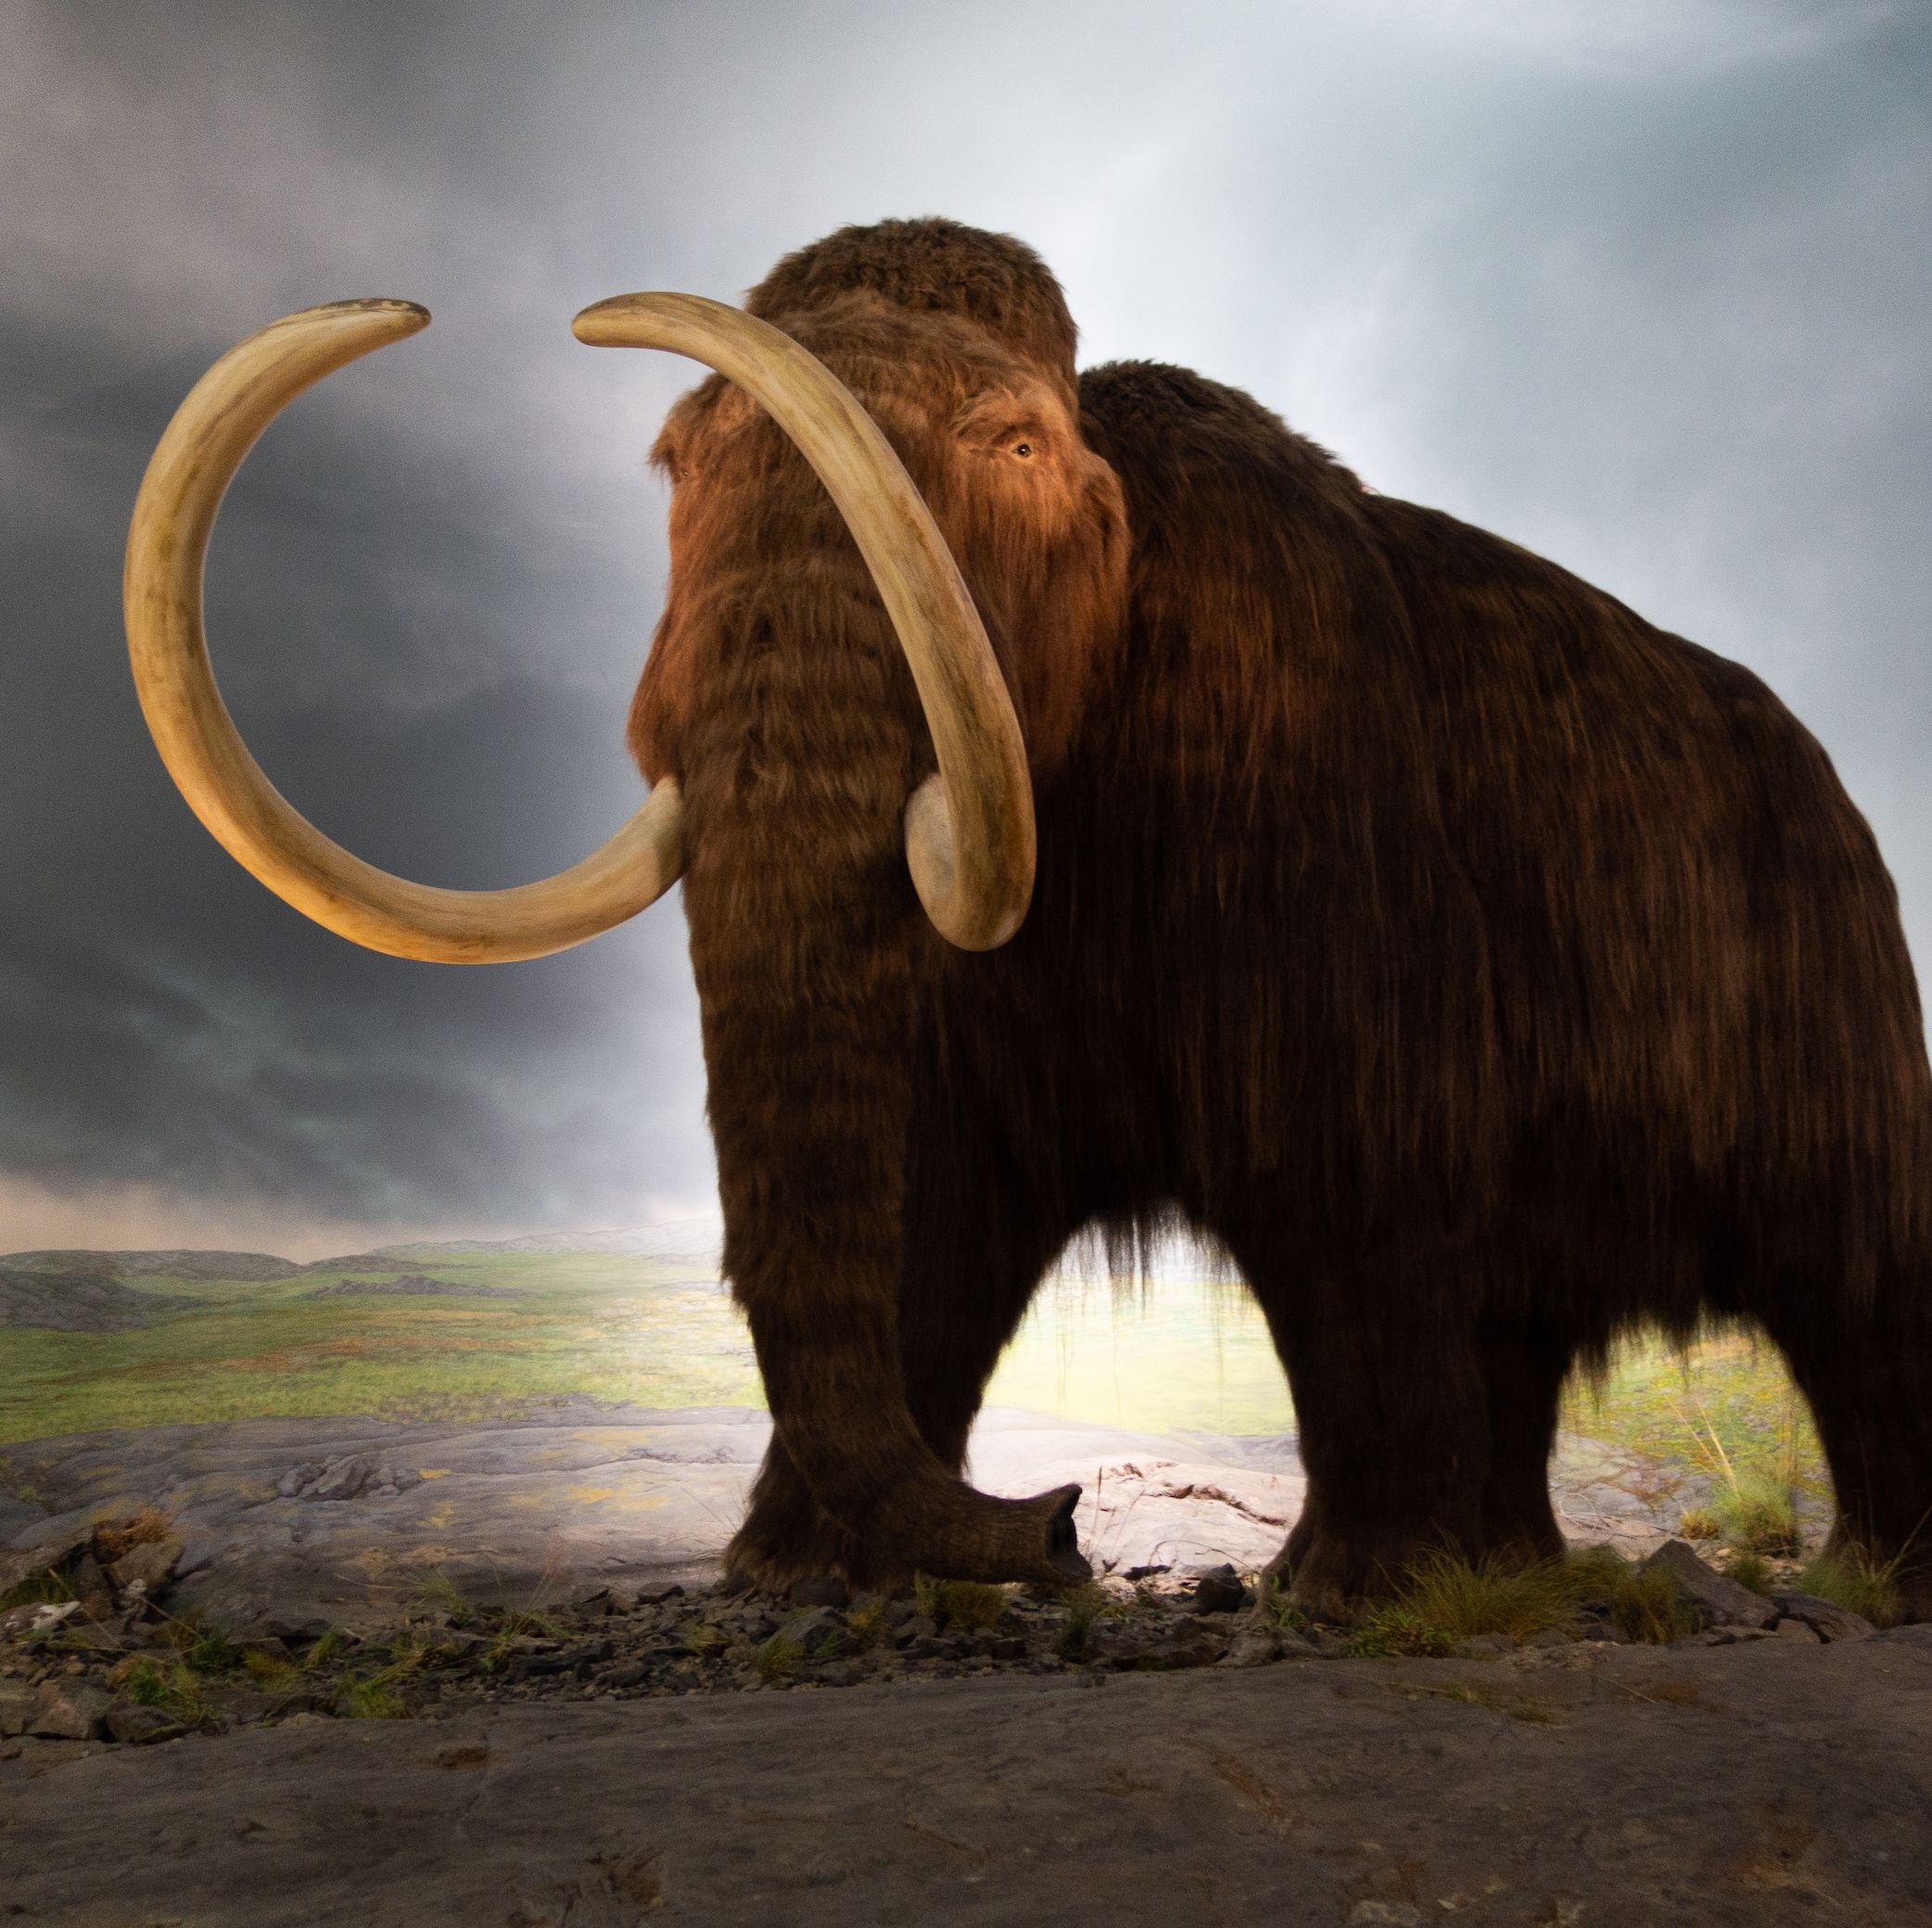 Bringing Back the Wooly Mammoth Is a Slippery Slope Toward 'Zoos Full of Eco-Zombies'